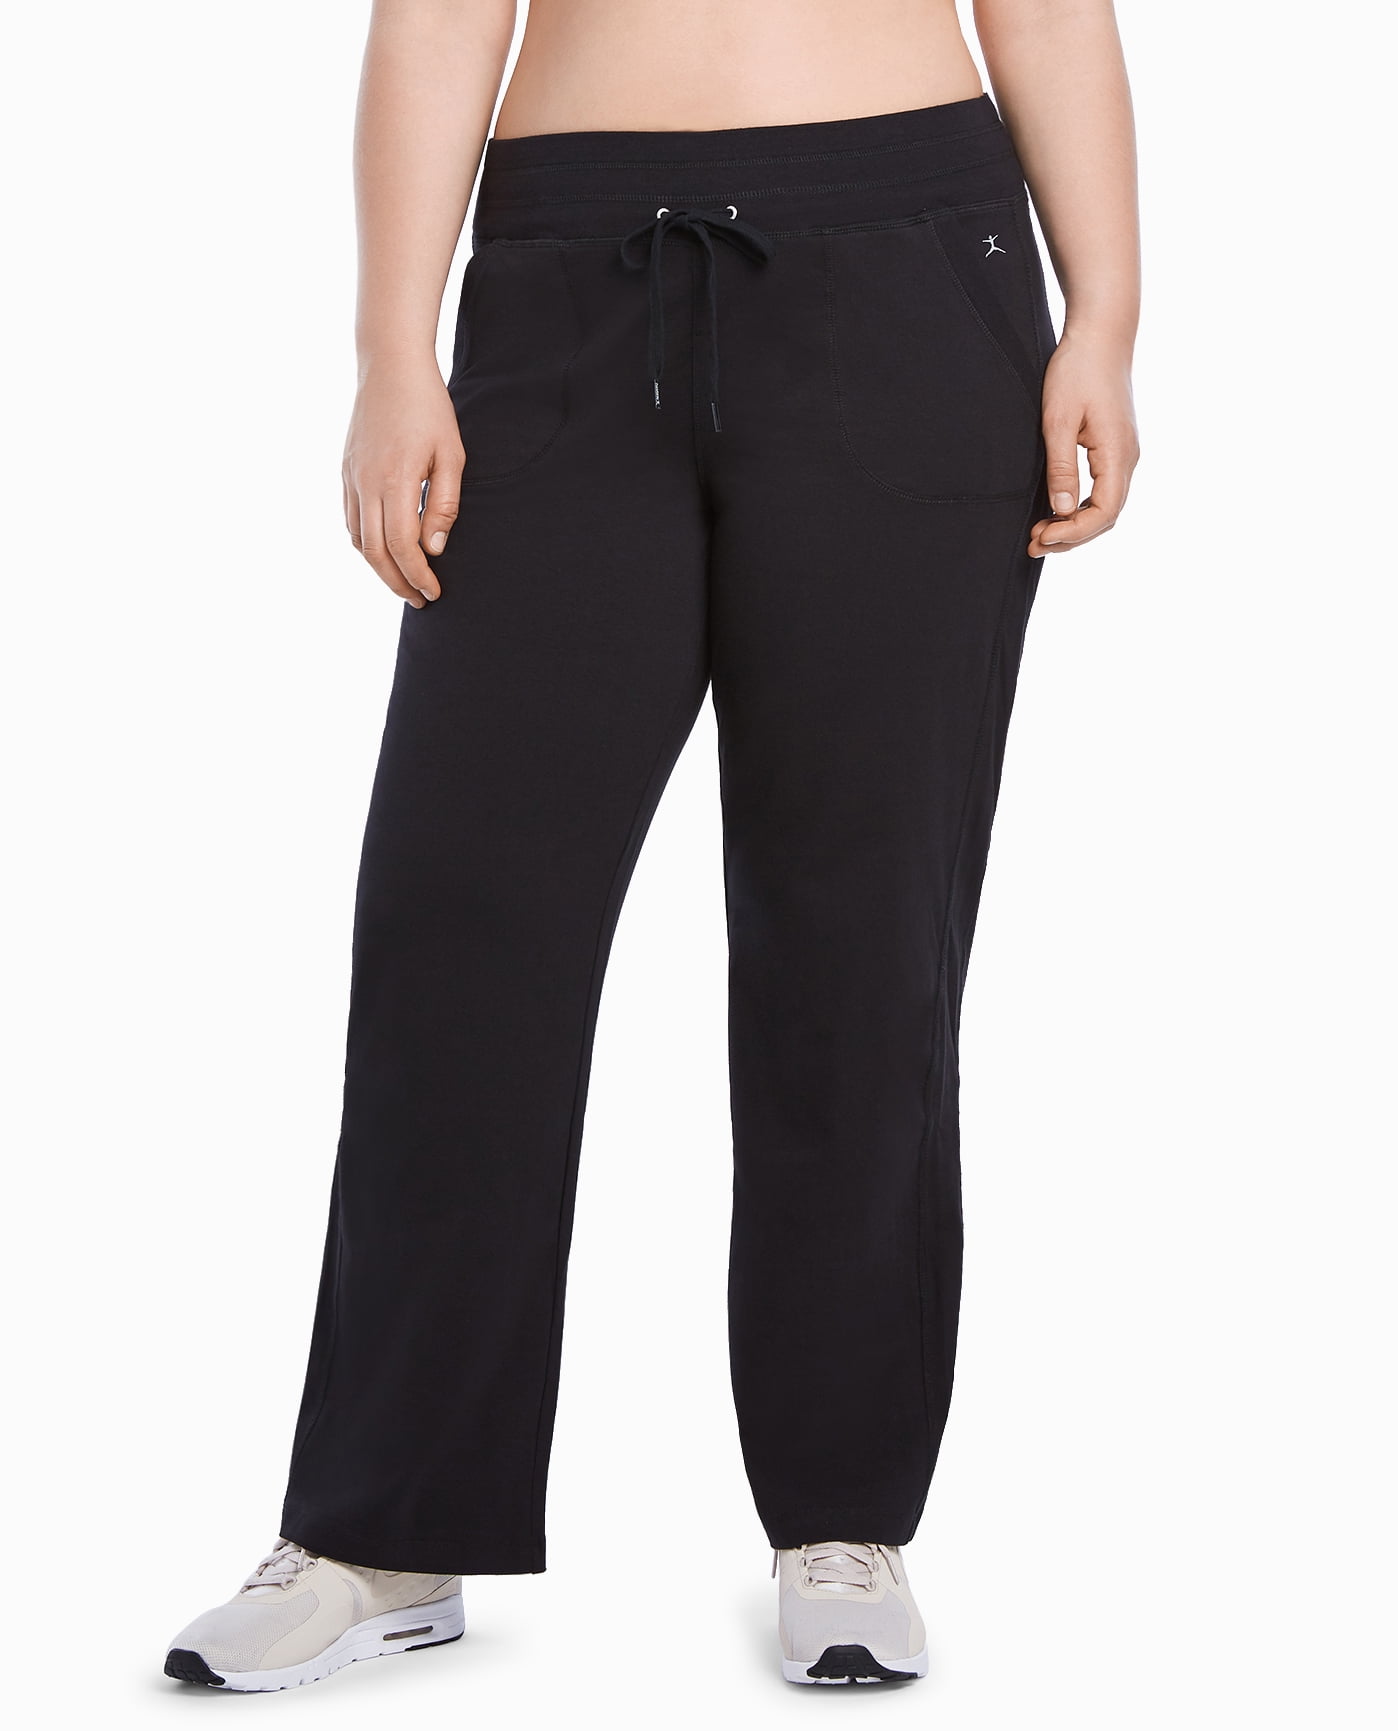 Danskin Women's Plus Size Active Relaxed Pant 